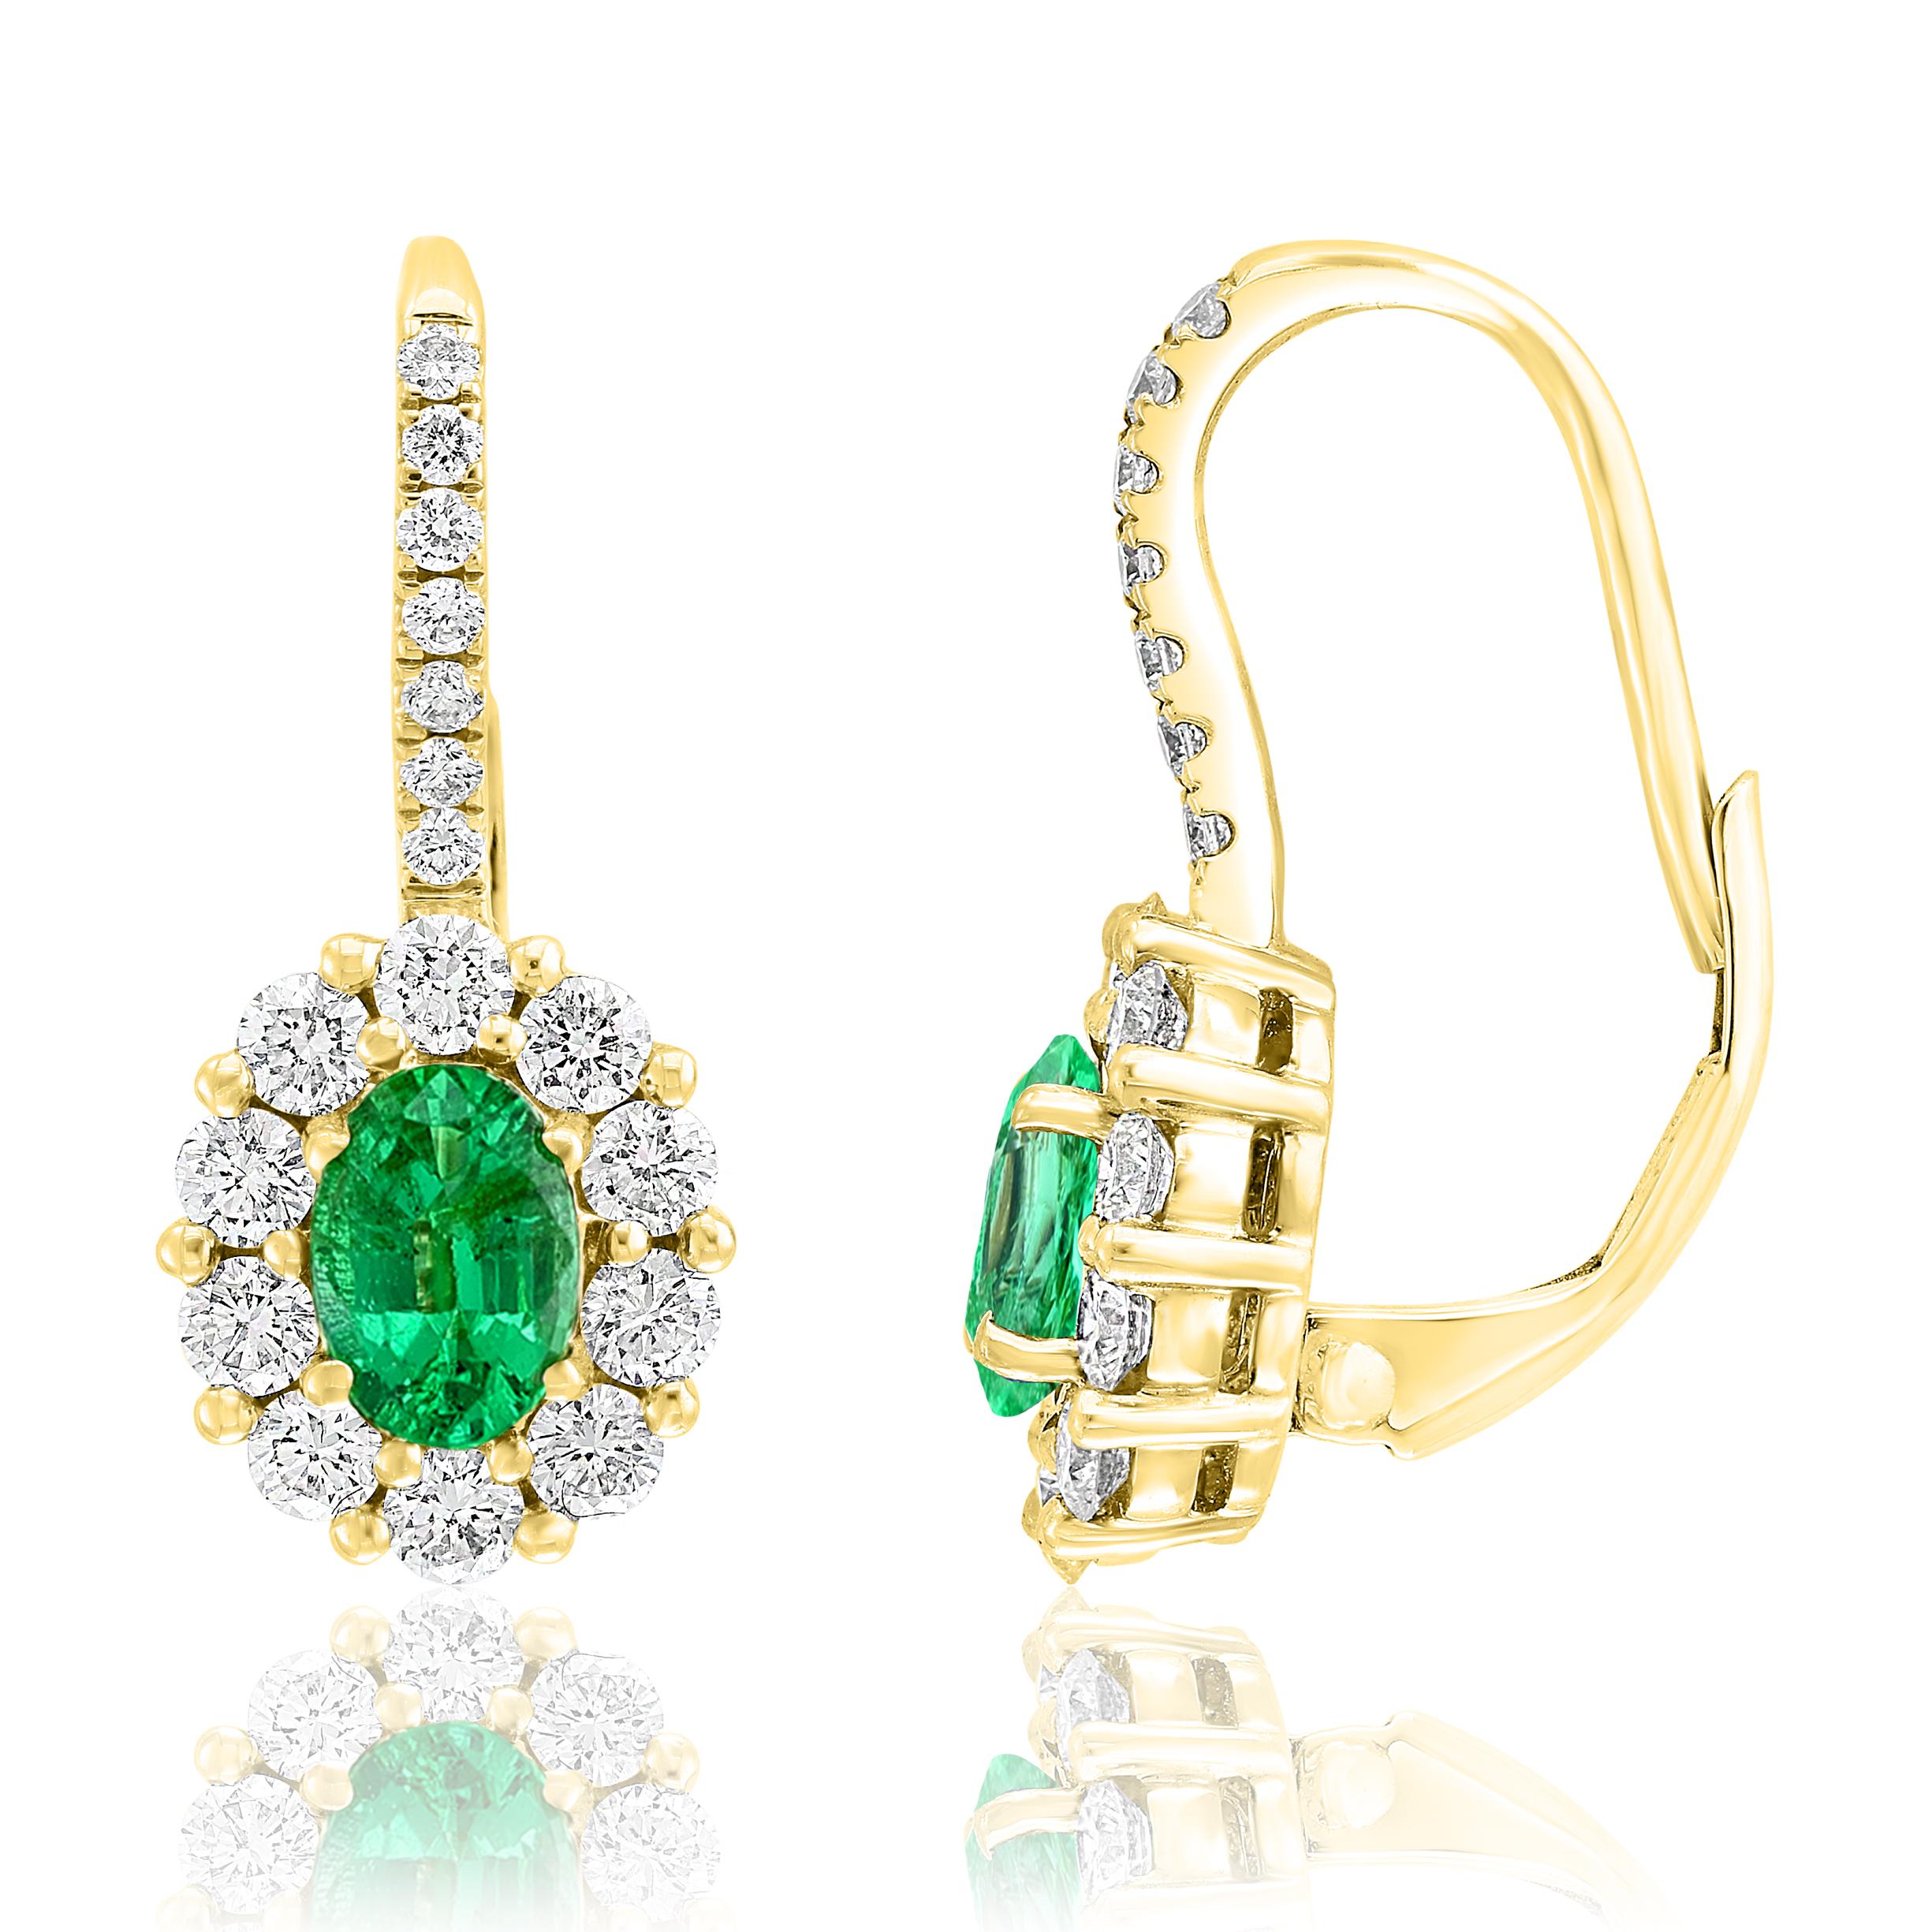 Contemporary 0.80 Carat Oval Cut Emerald and Diamond Earrings in 18K Yellow Gold For Sale